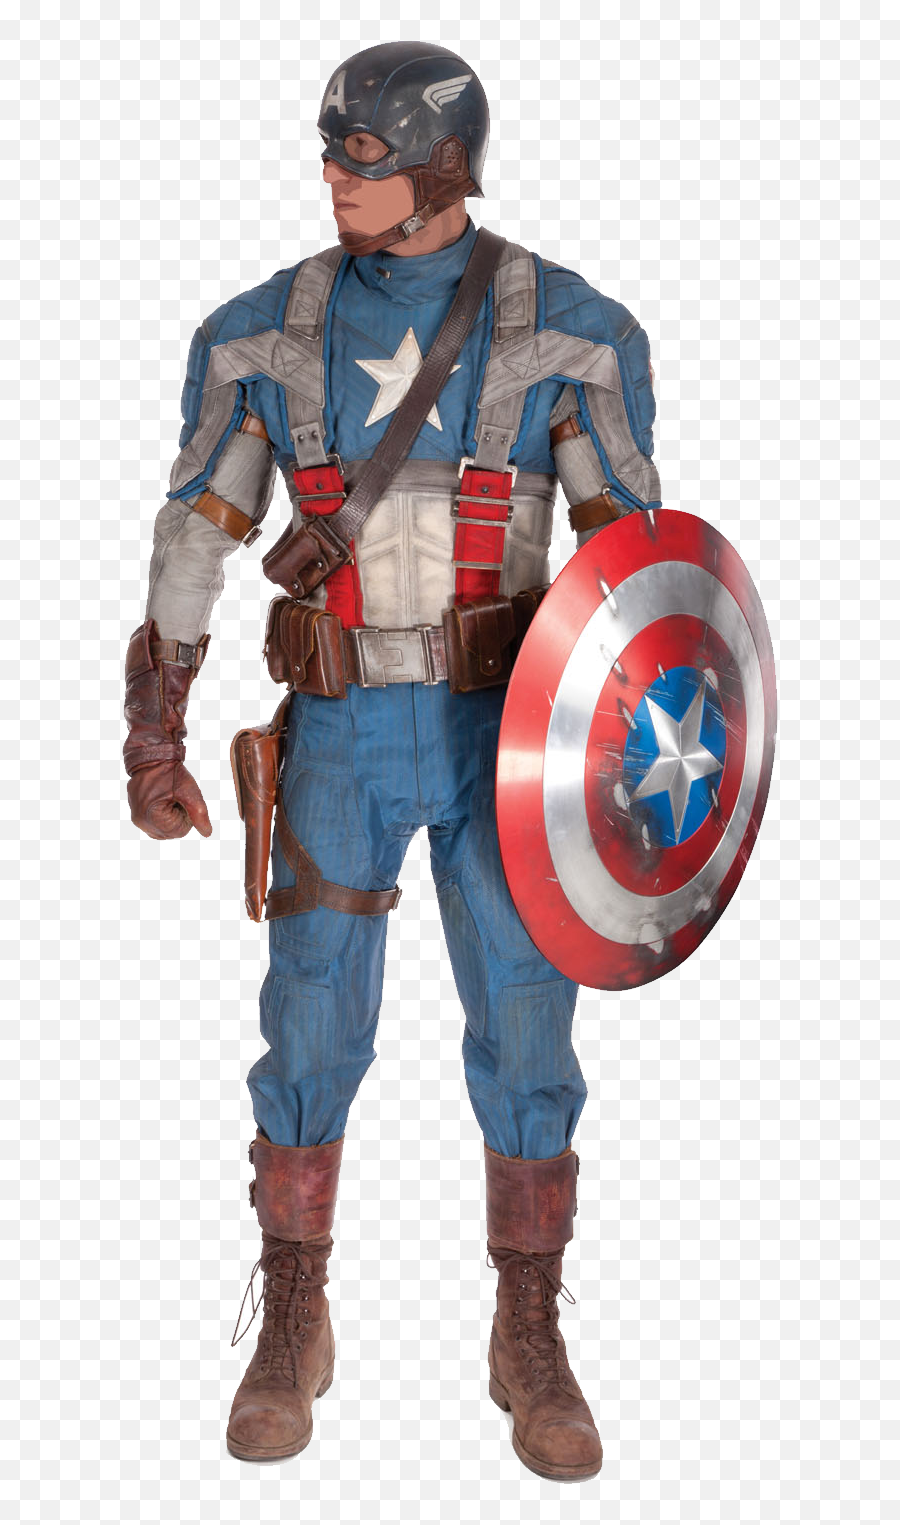 Download Captain America Png Image For Free - Captain Captain America Emoji,Captain America Png